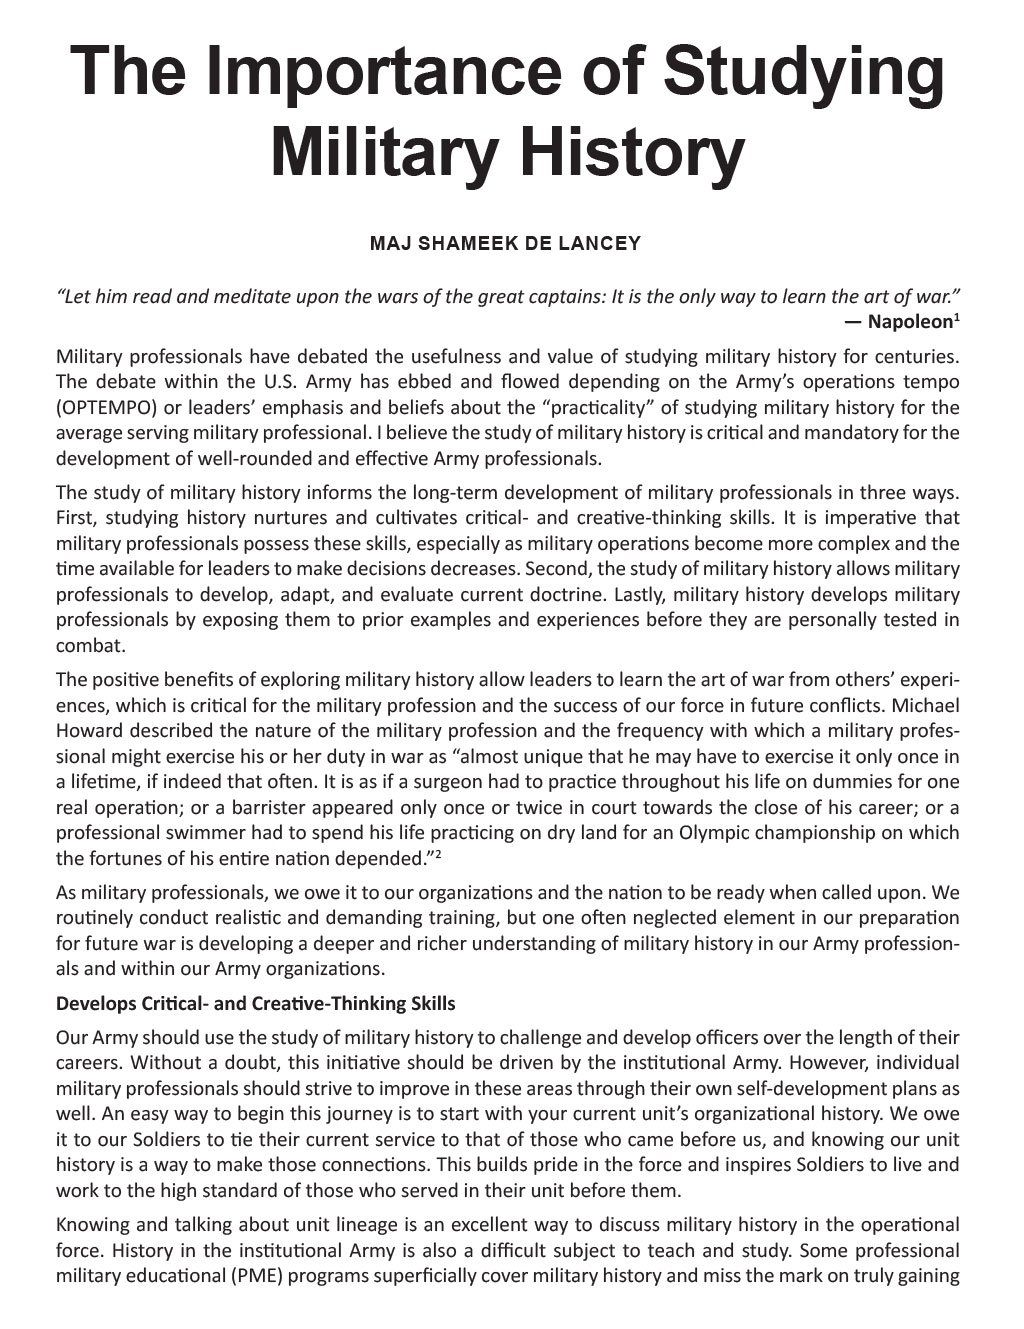 The image is a page containing an article titled The Importance of Studying Military History by MAJ Shameek De Lancey.